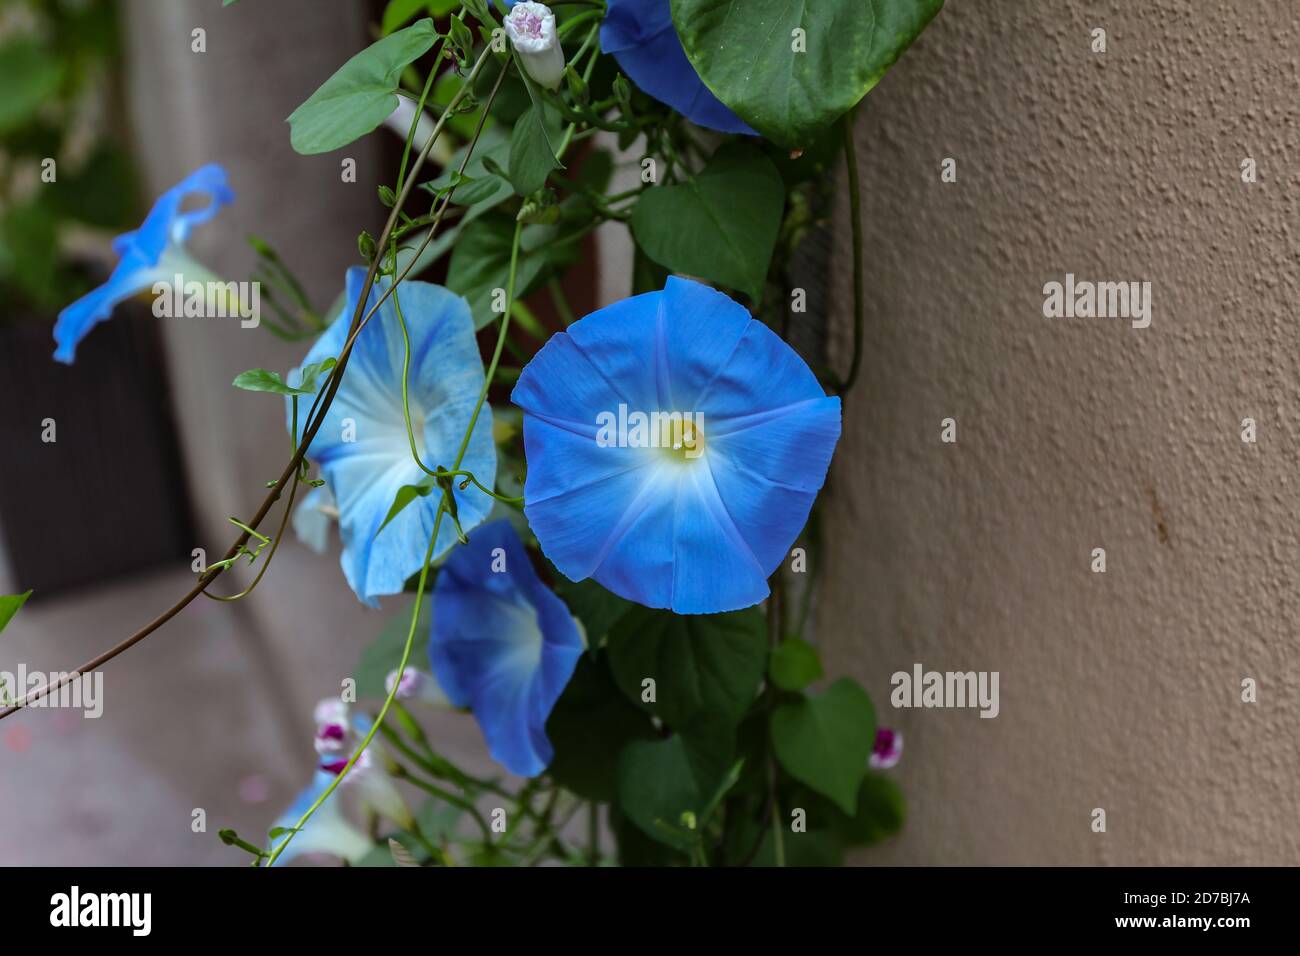 Close of shot of the blue flower convolvulus grown on a wall in a homeyard Stock Photo